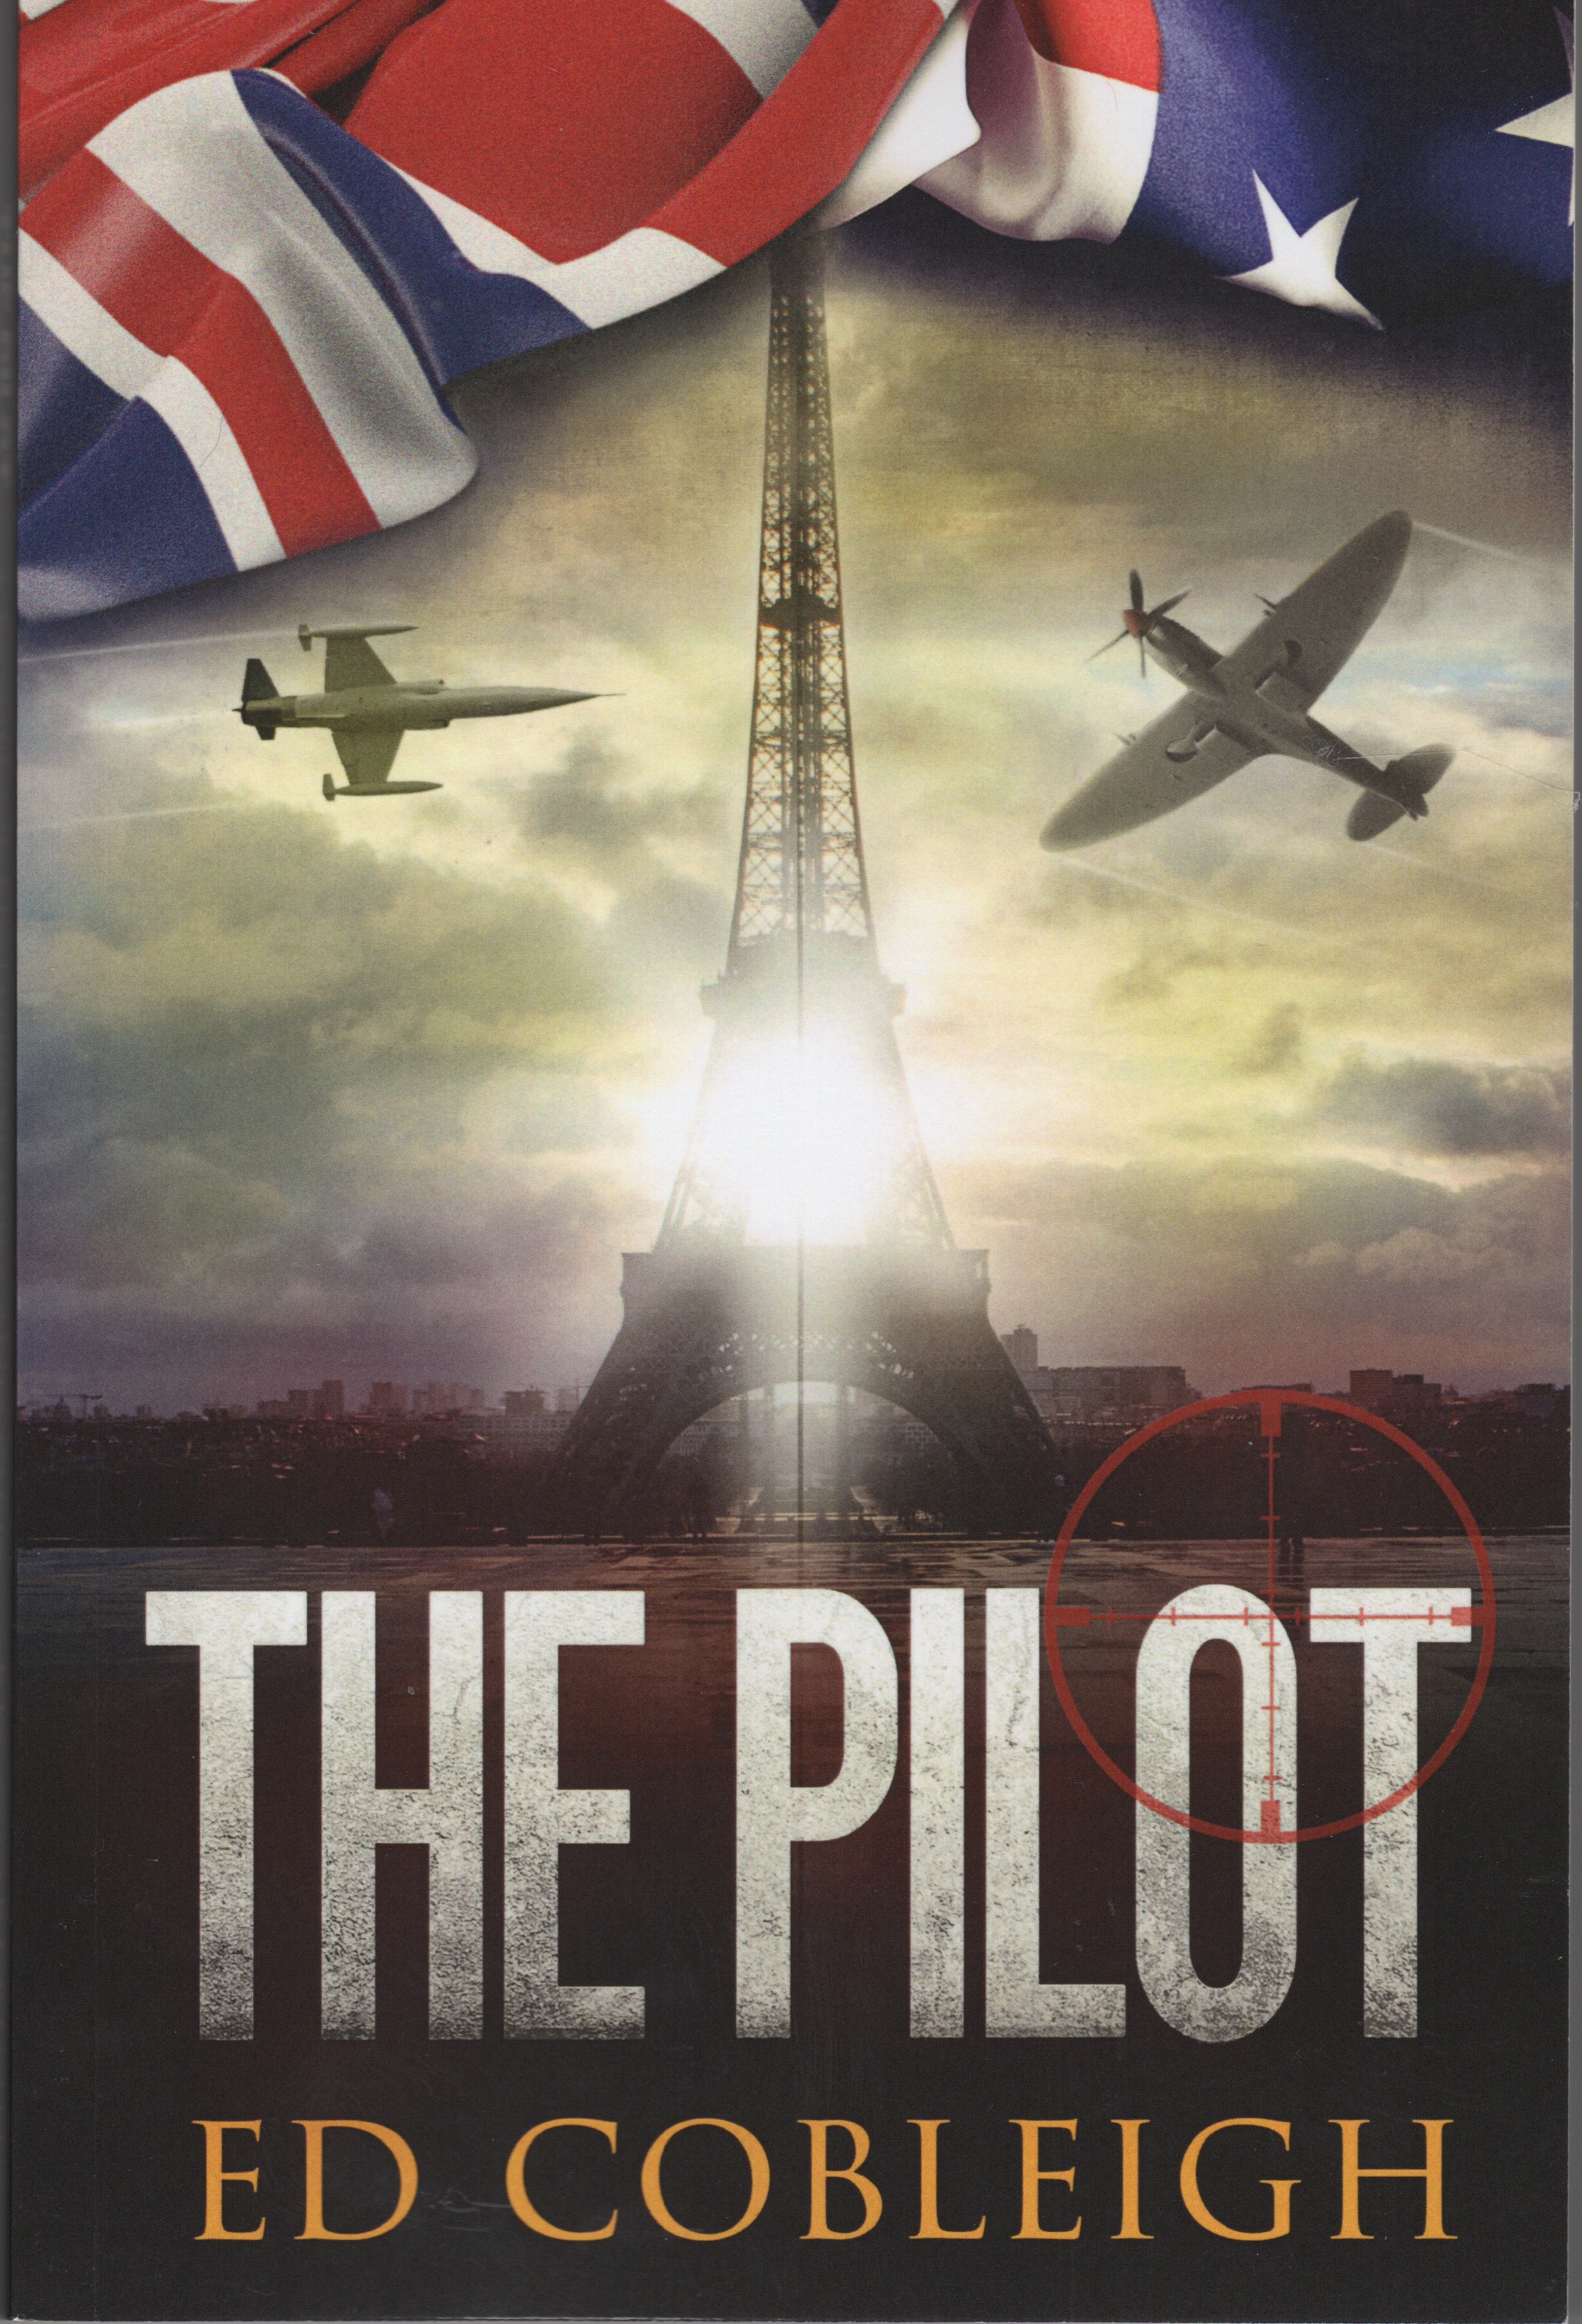 Ed Cobleigh's 'The Pilot' Book (Autographed)